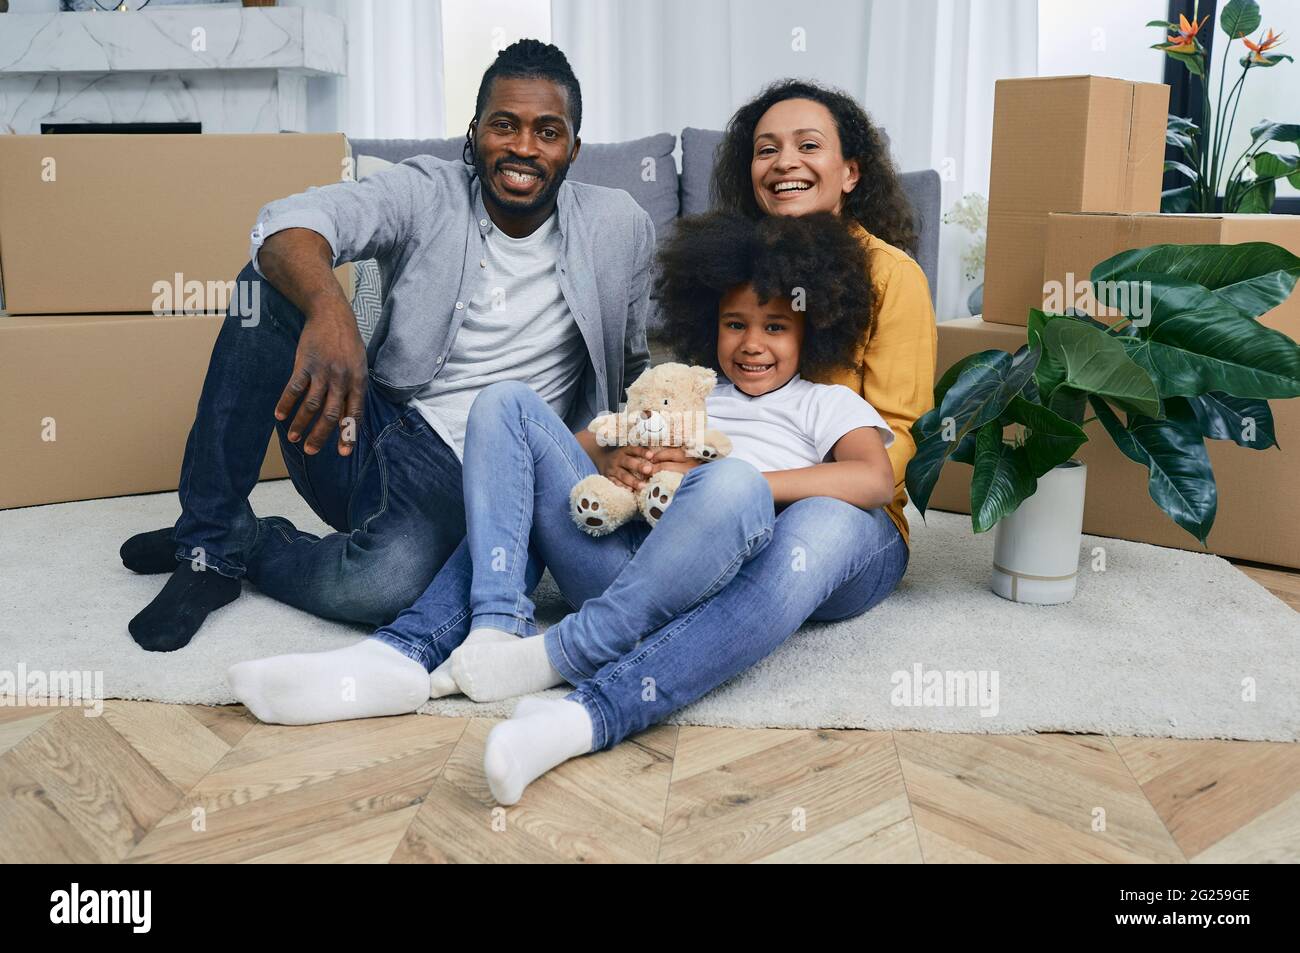 Happy mixed race family having fun while moving into a new apartment. Mother, father, and daughter together sitting on floor of a new home, with cardb Stock Photo